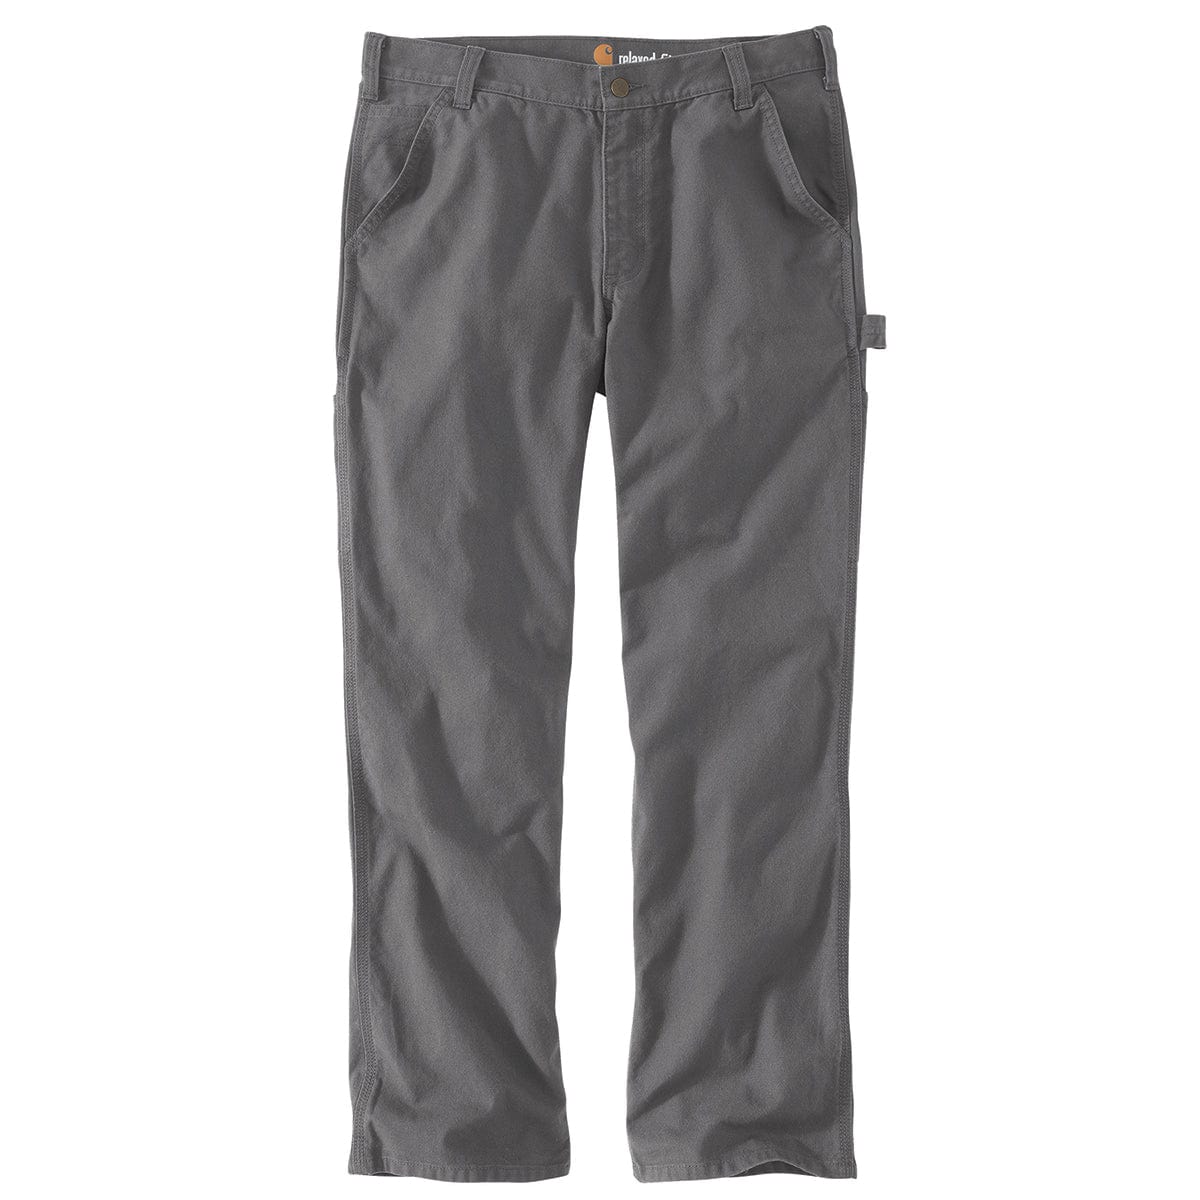 Carhartt Rugged Flex Relaxed Fit Duck Utility Work Pant, Gravel